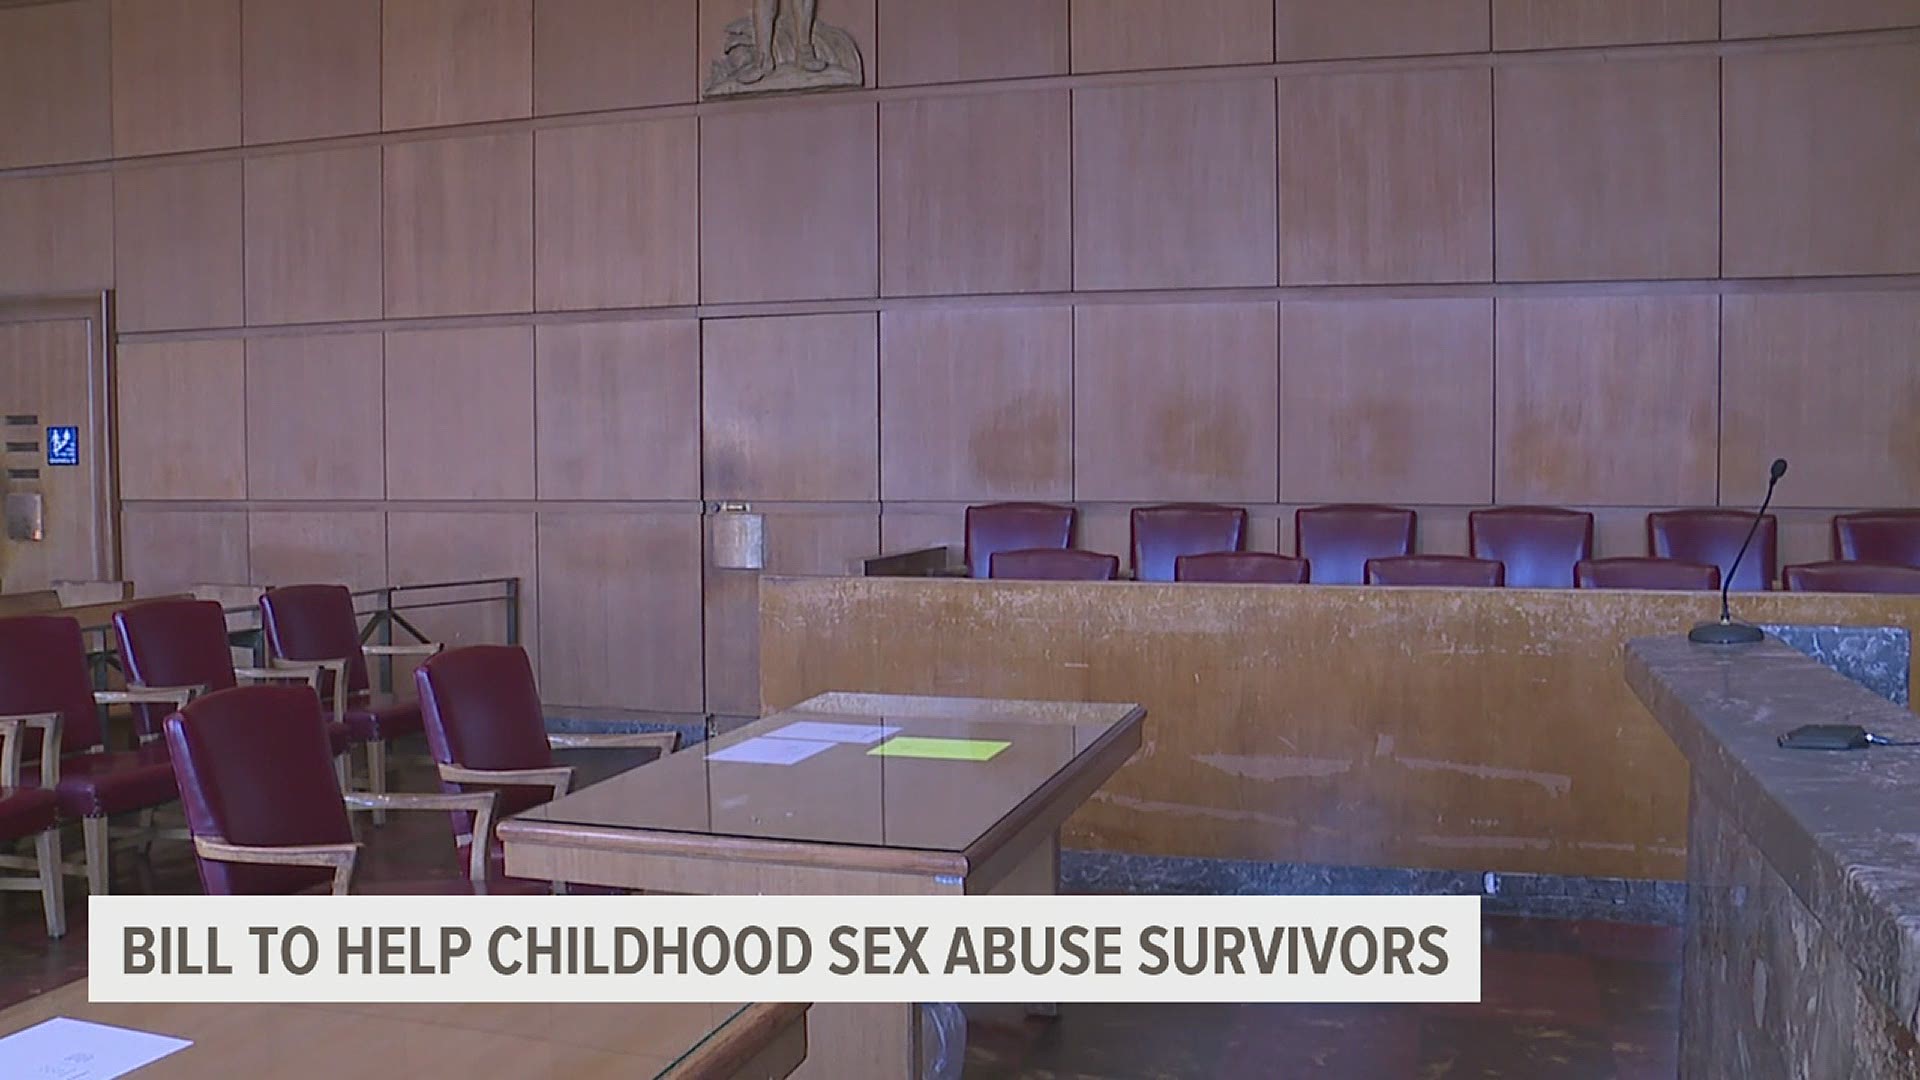 The Pennsylvania General Assembly is again discussing legislation to aid survivors of childhood sexual abuse and again faces an uphill battle to be passed.